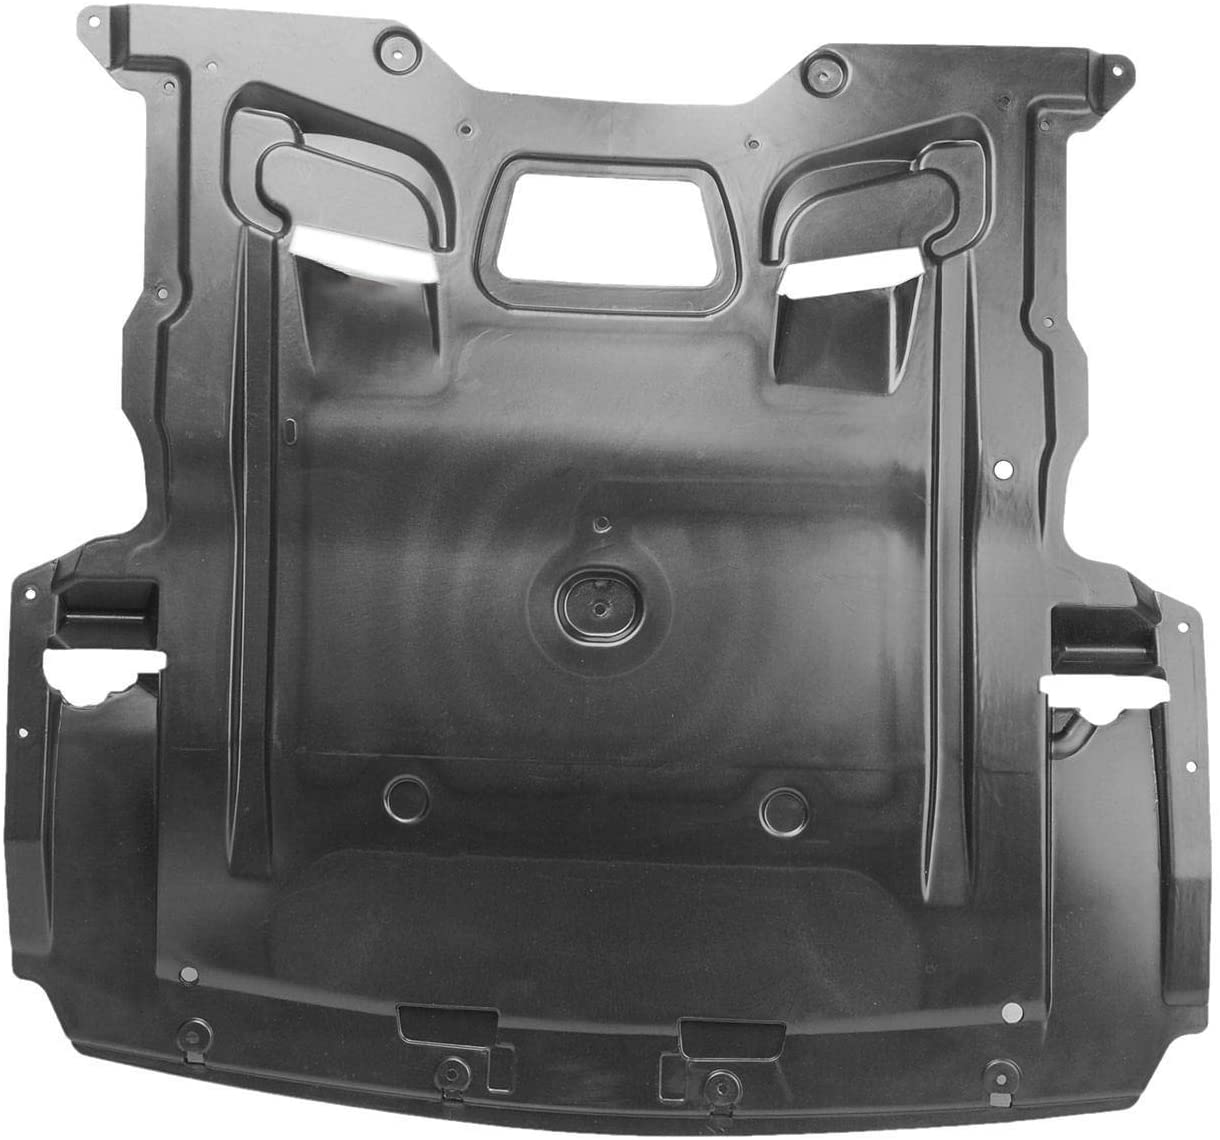 Aftermarket UNDER ENGINE COVERS for BMW - 650I, 650i,12-17,Lower engine cover